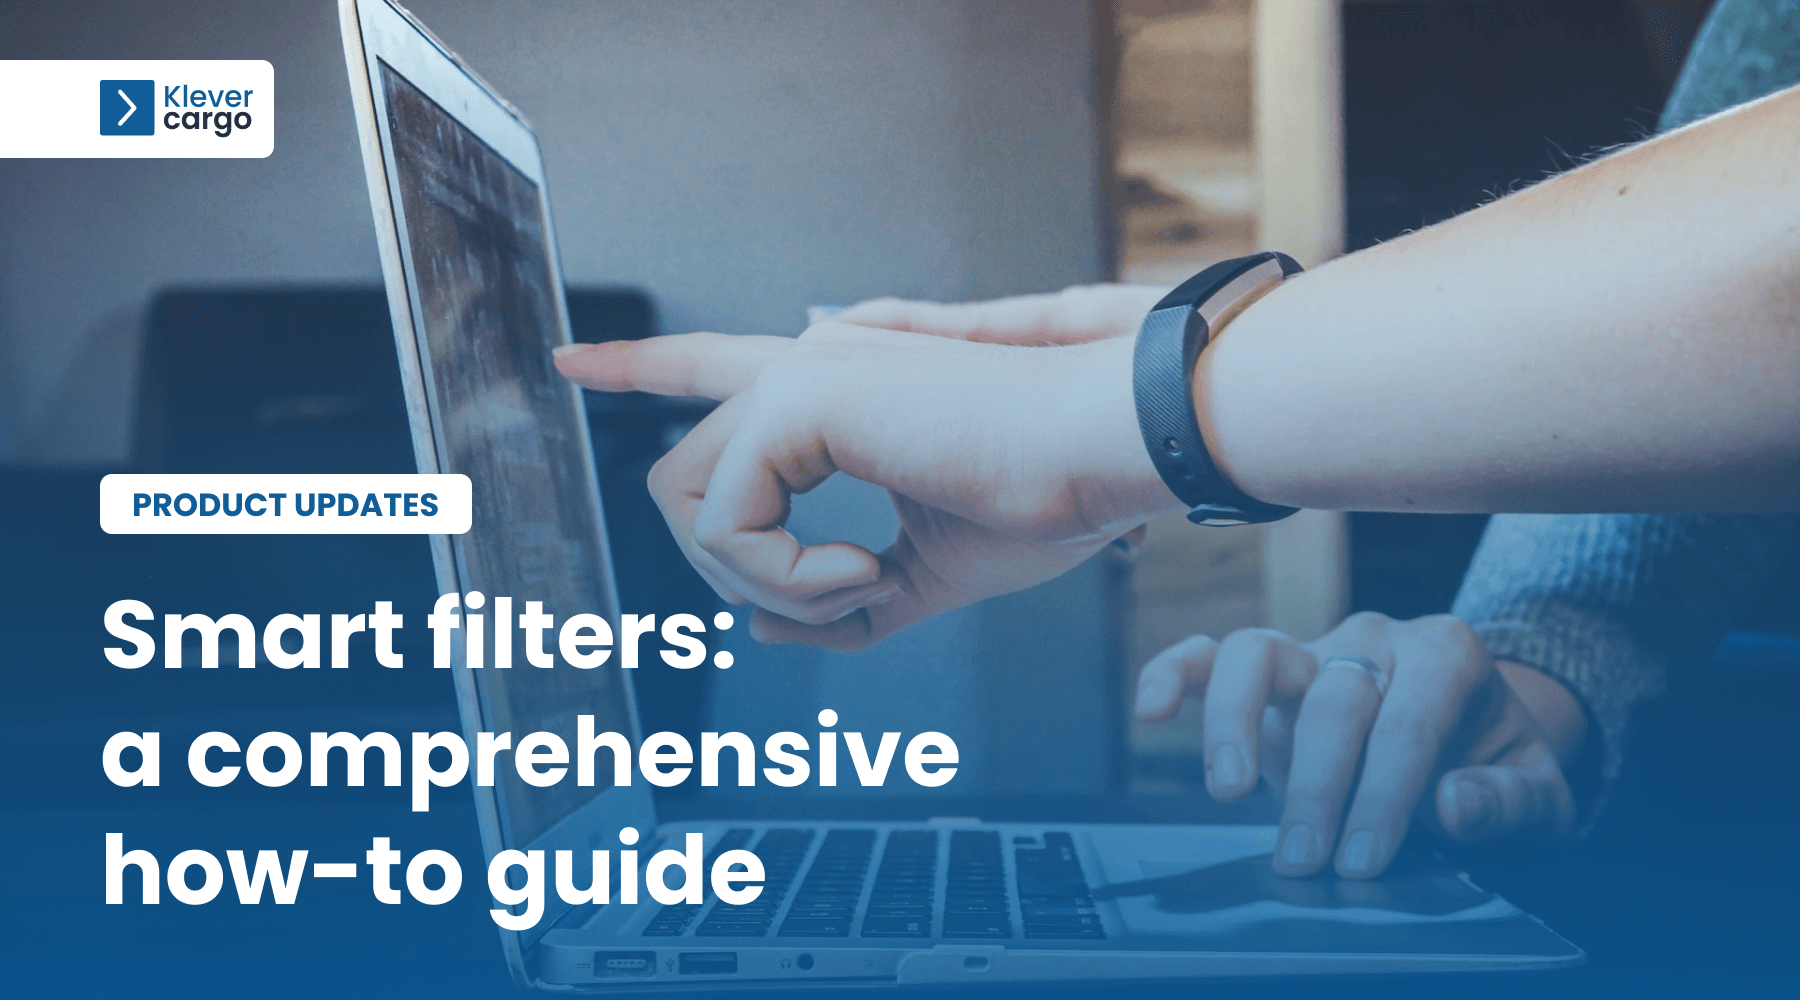 Smart filters: a comprehensive how-to guide